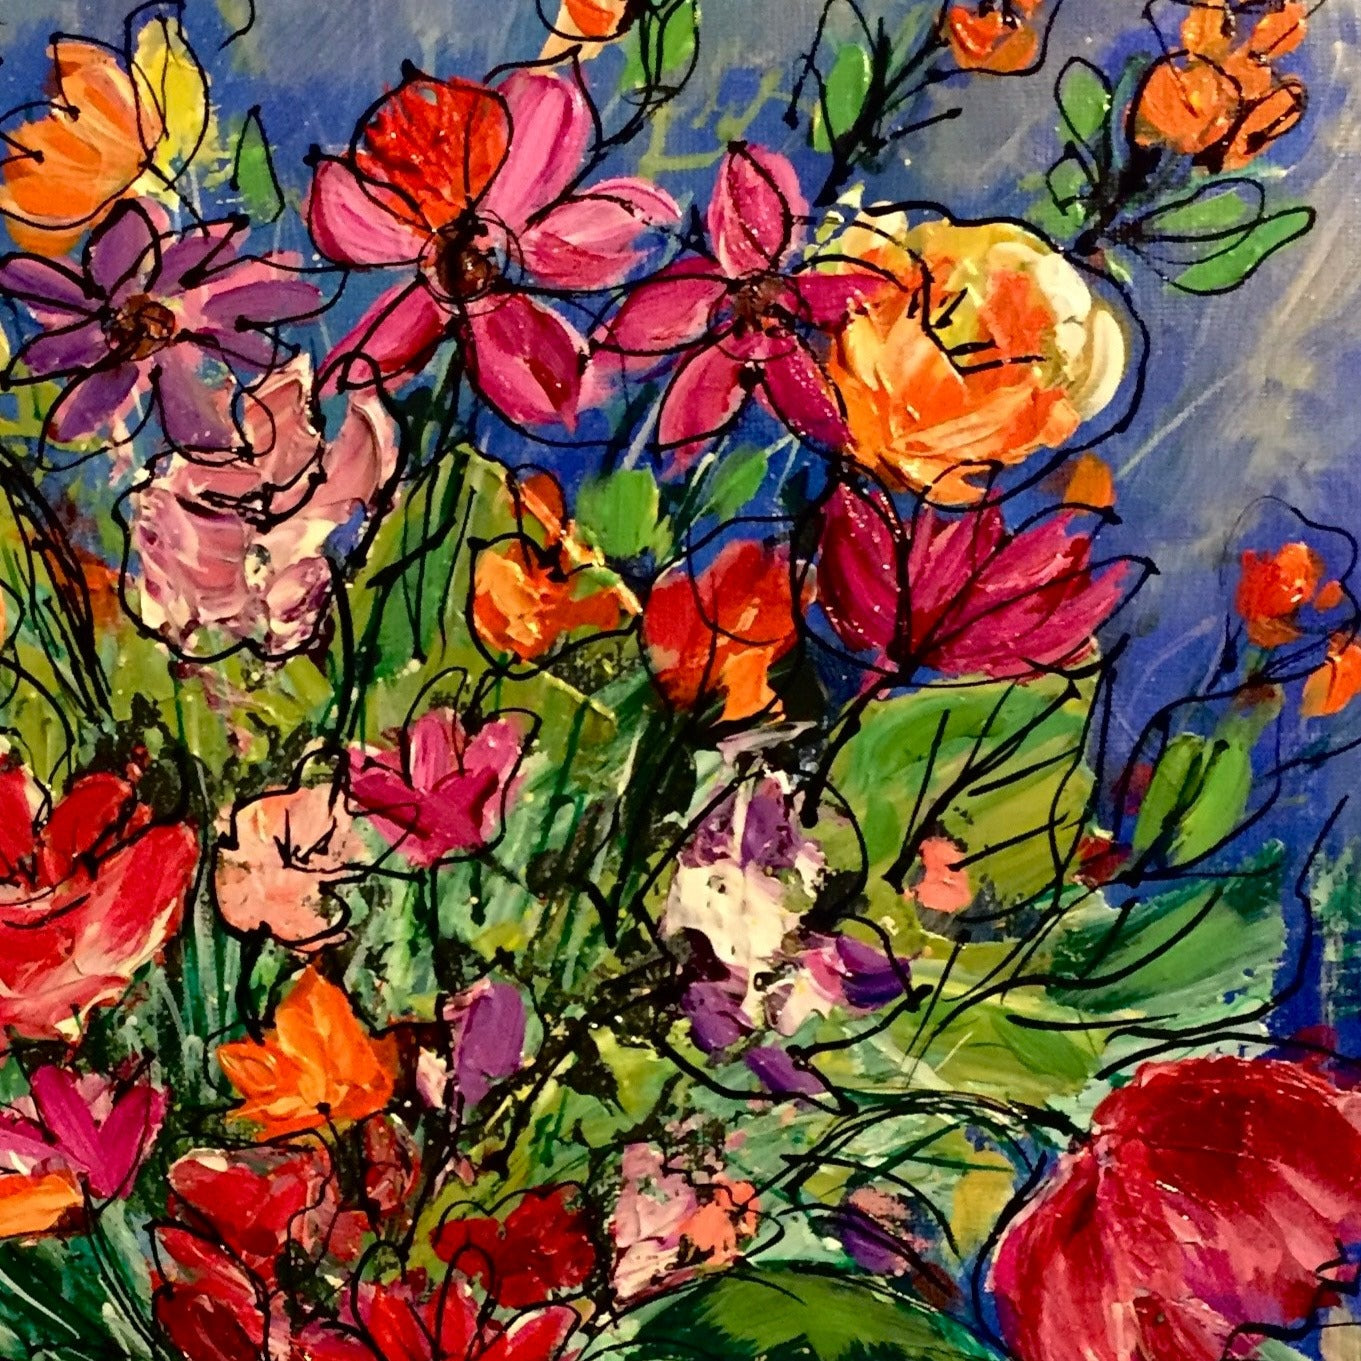 Abstract Flower Painting Workshop with Mary Espinosa - Sunday, June 23rd